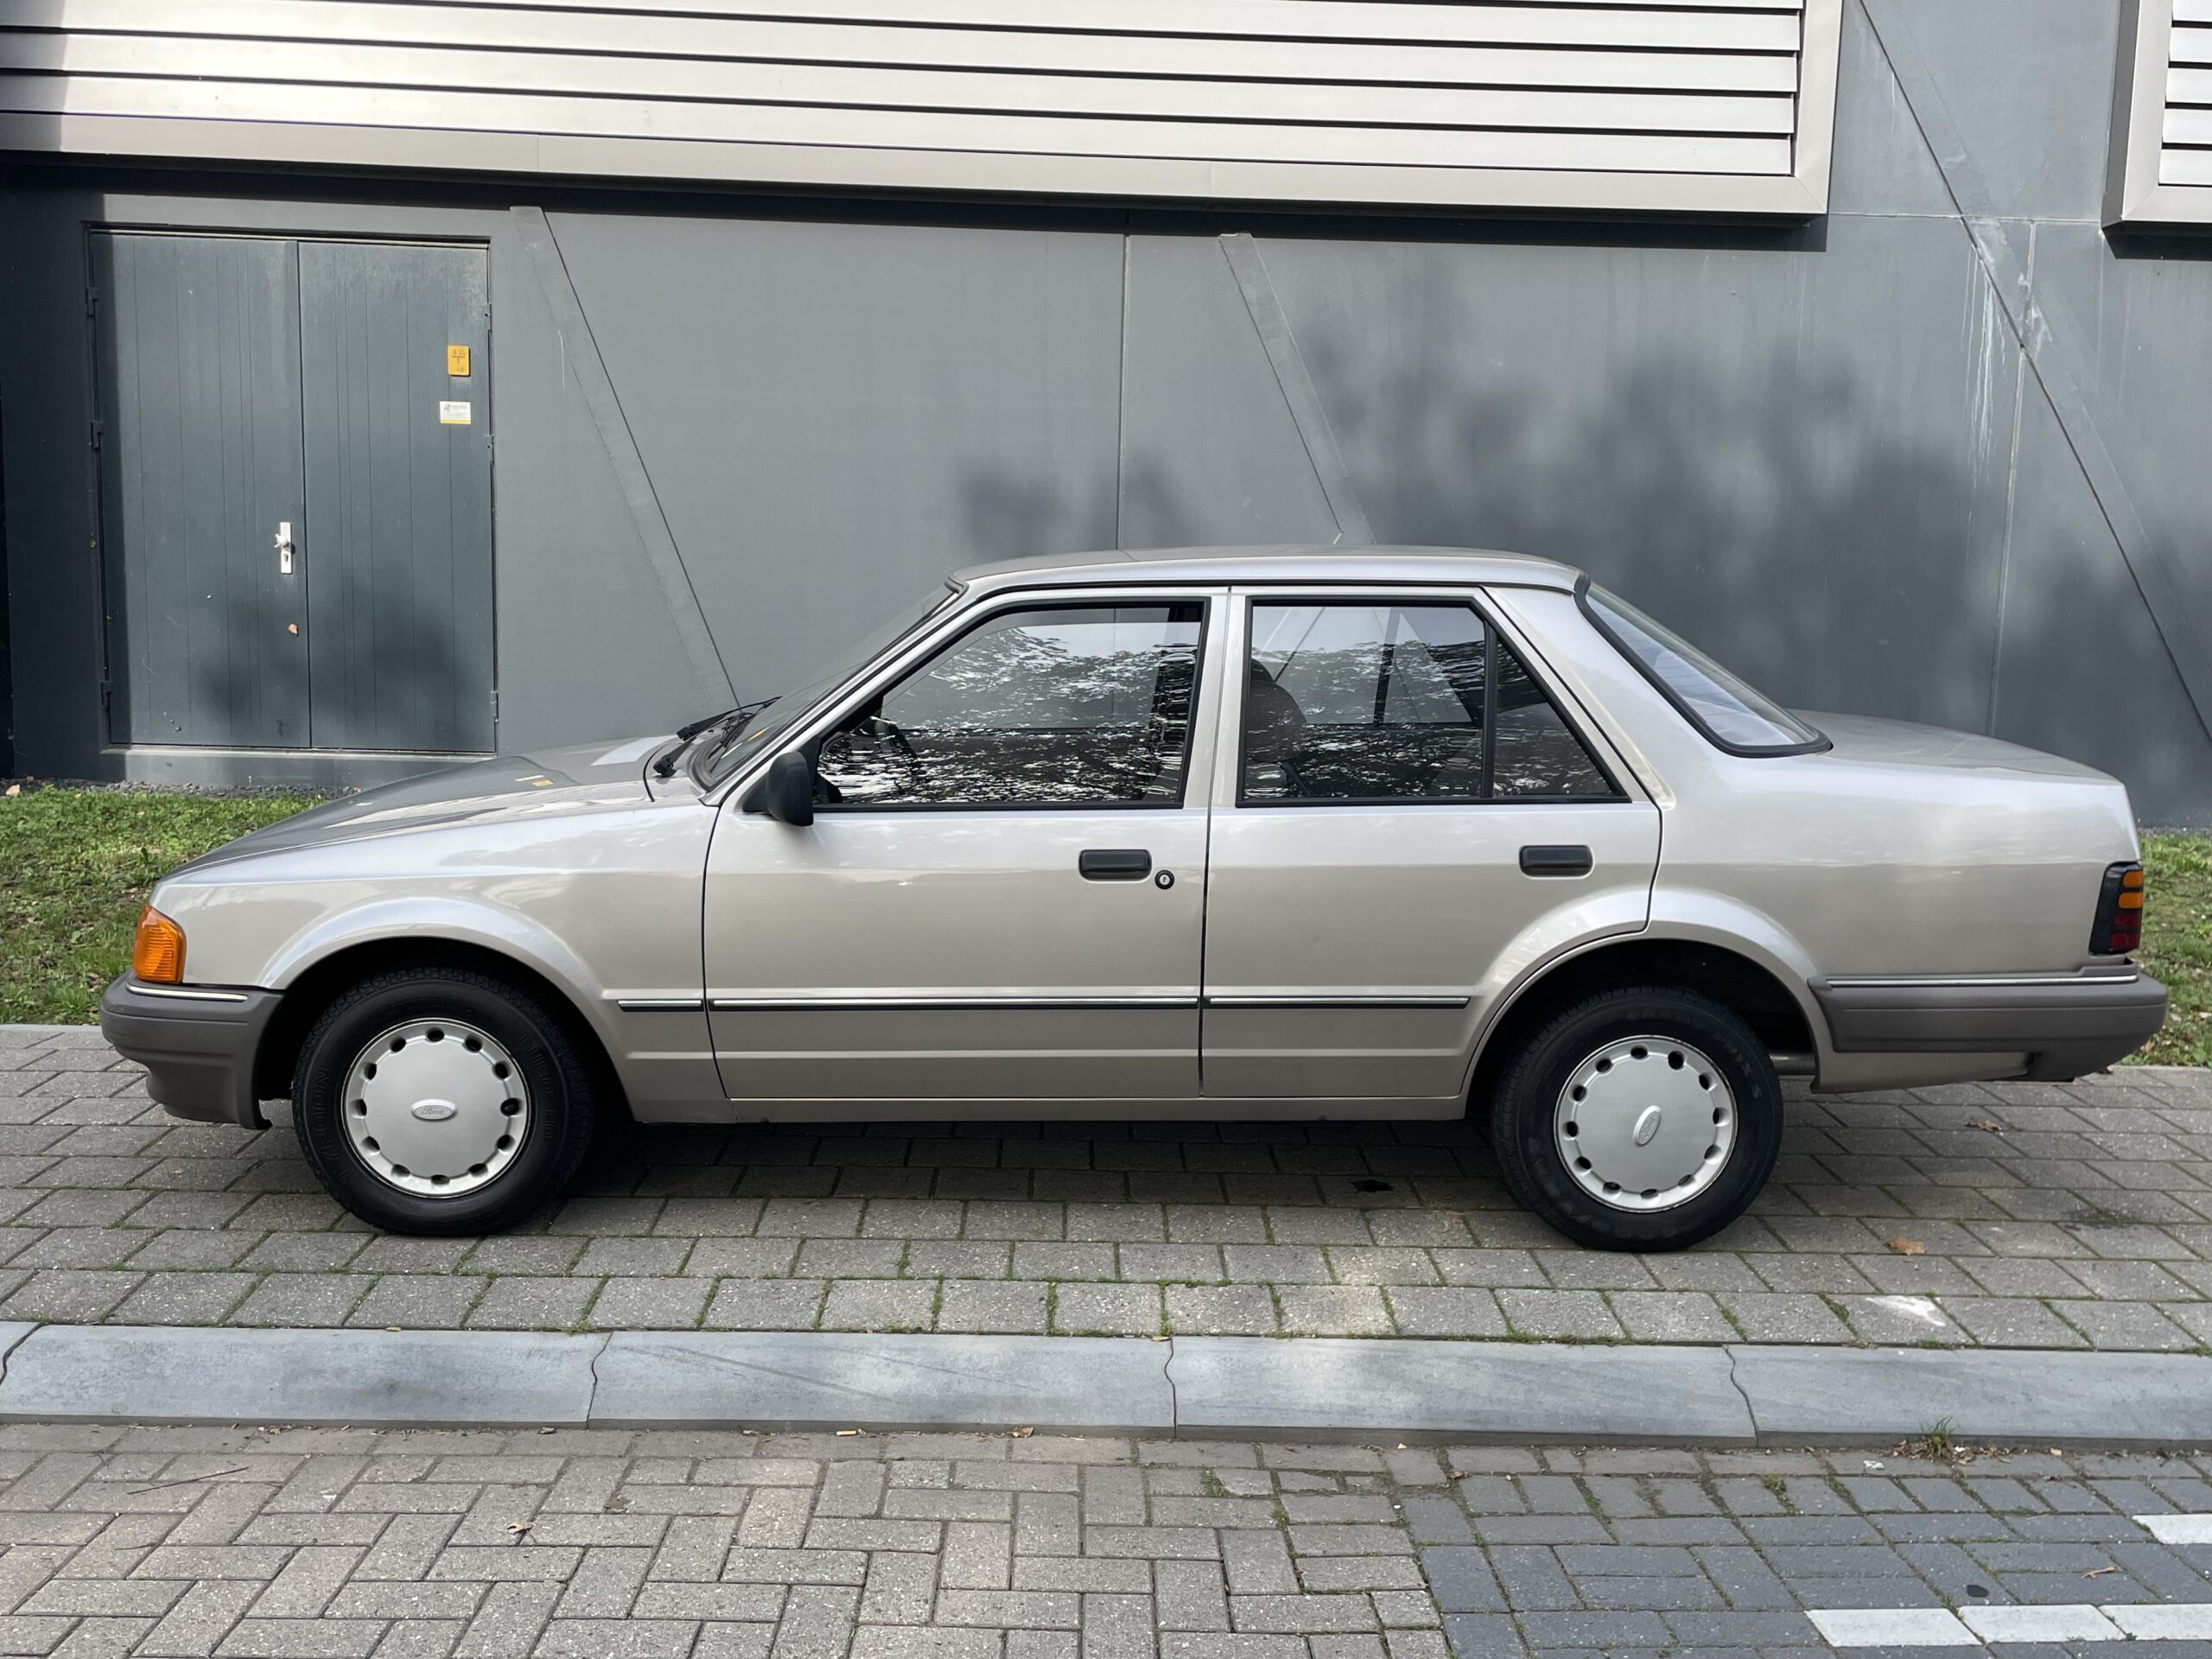 Ford Orion 1.4 CL